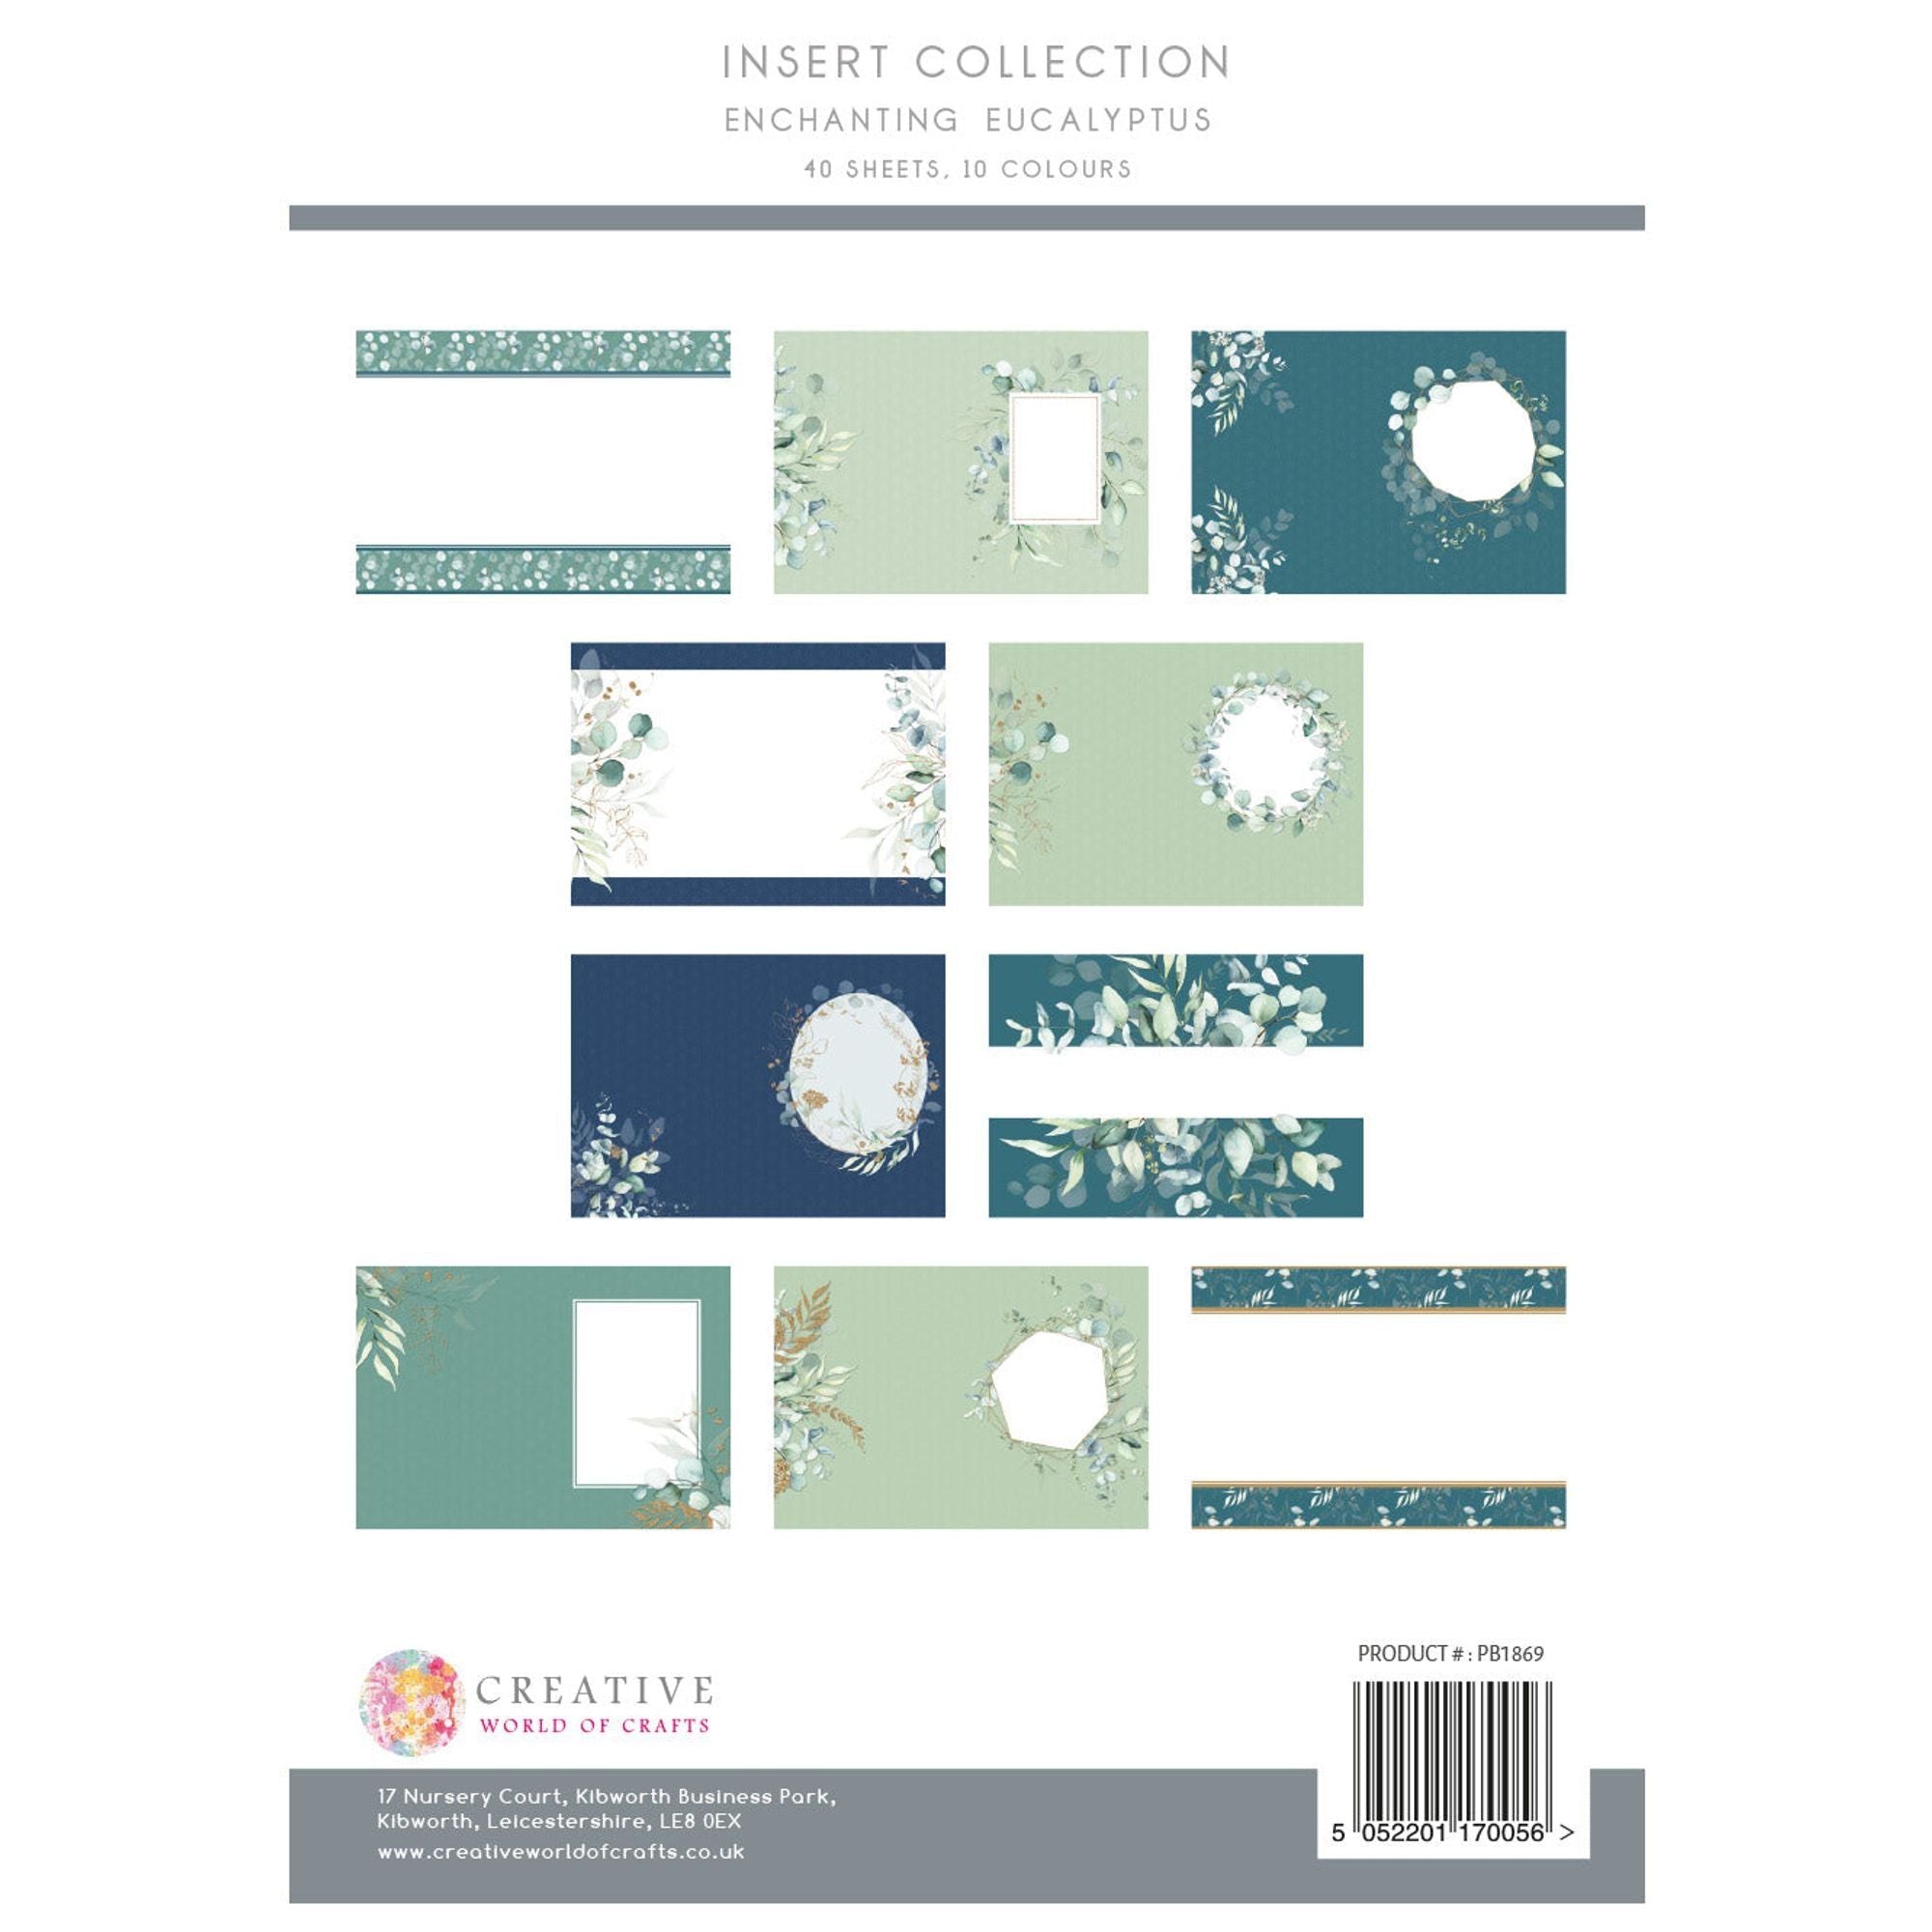 The Paper Boutique Enchanting Eucalyptus Insert Collection